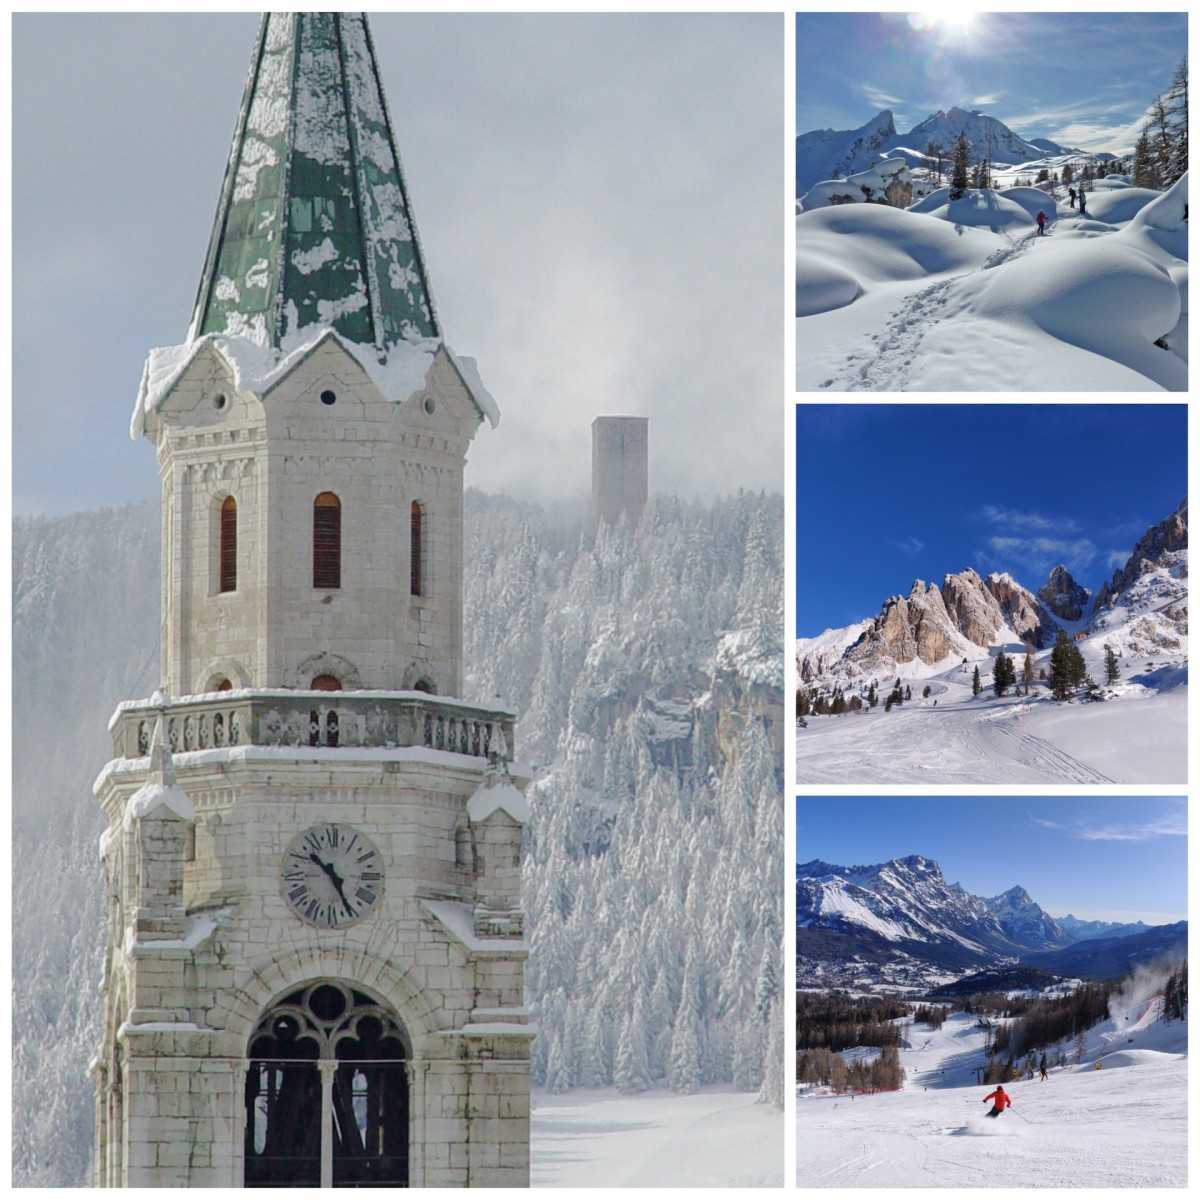 Winter wonderland Cortina d‘Ampezzo in the Dolomite Region – the Campanile, snowshoeing, Mount Cristallo northeast of Cortina, downhill skiing with views of the Tofane massif west of Cortina